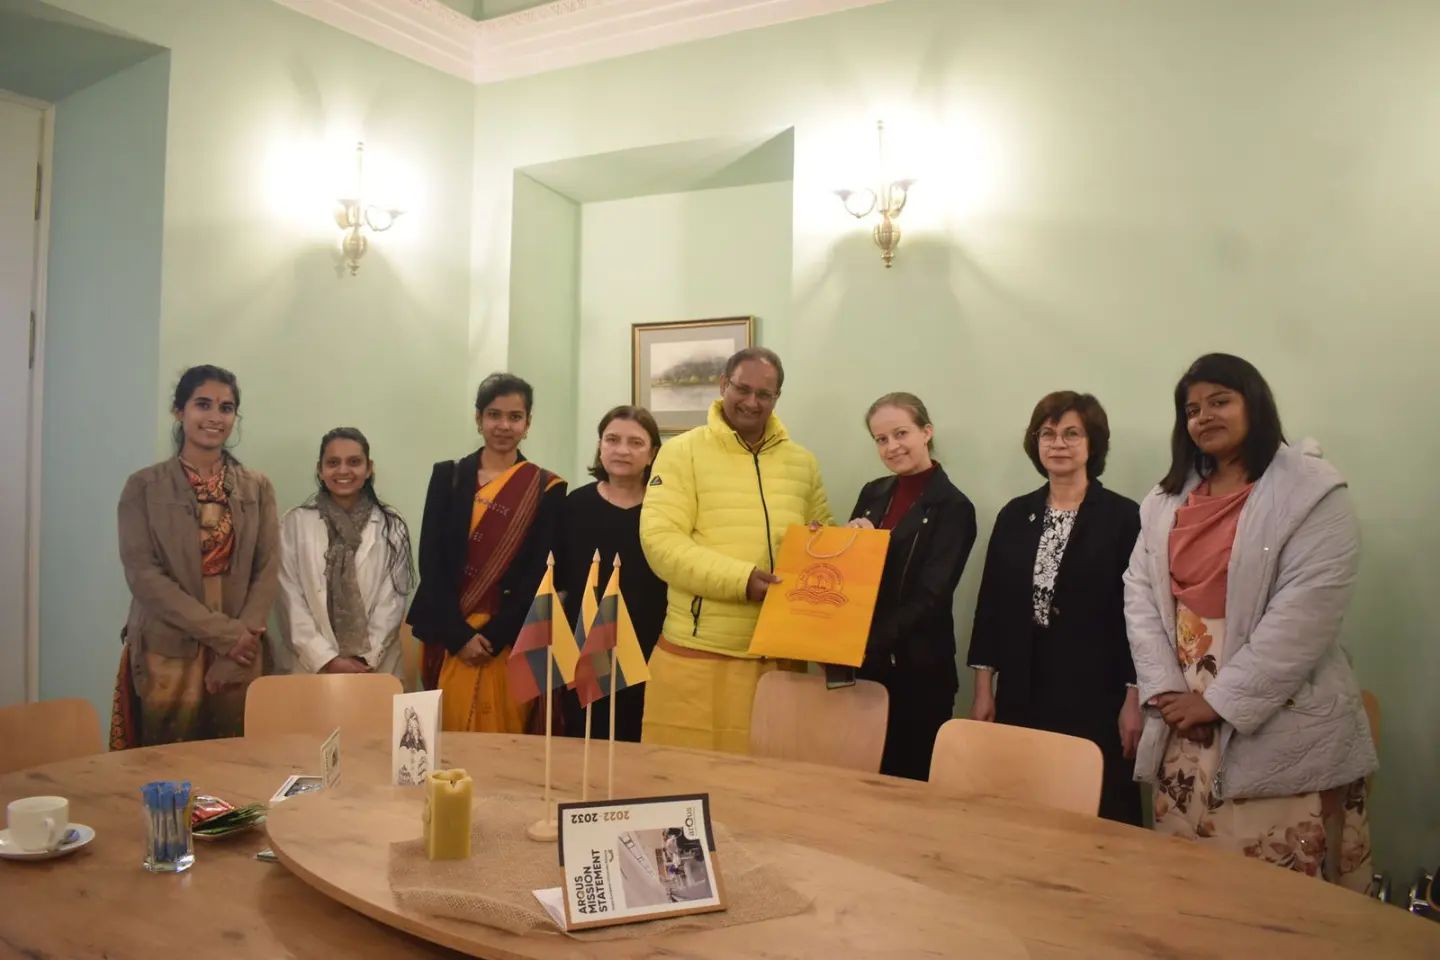 Respected Dr Chinmay Pandya ji reached Vilnius, the capital of Lithuania